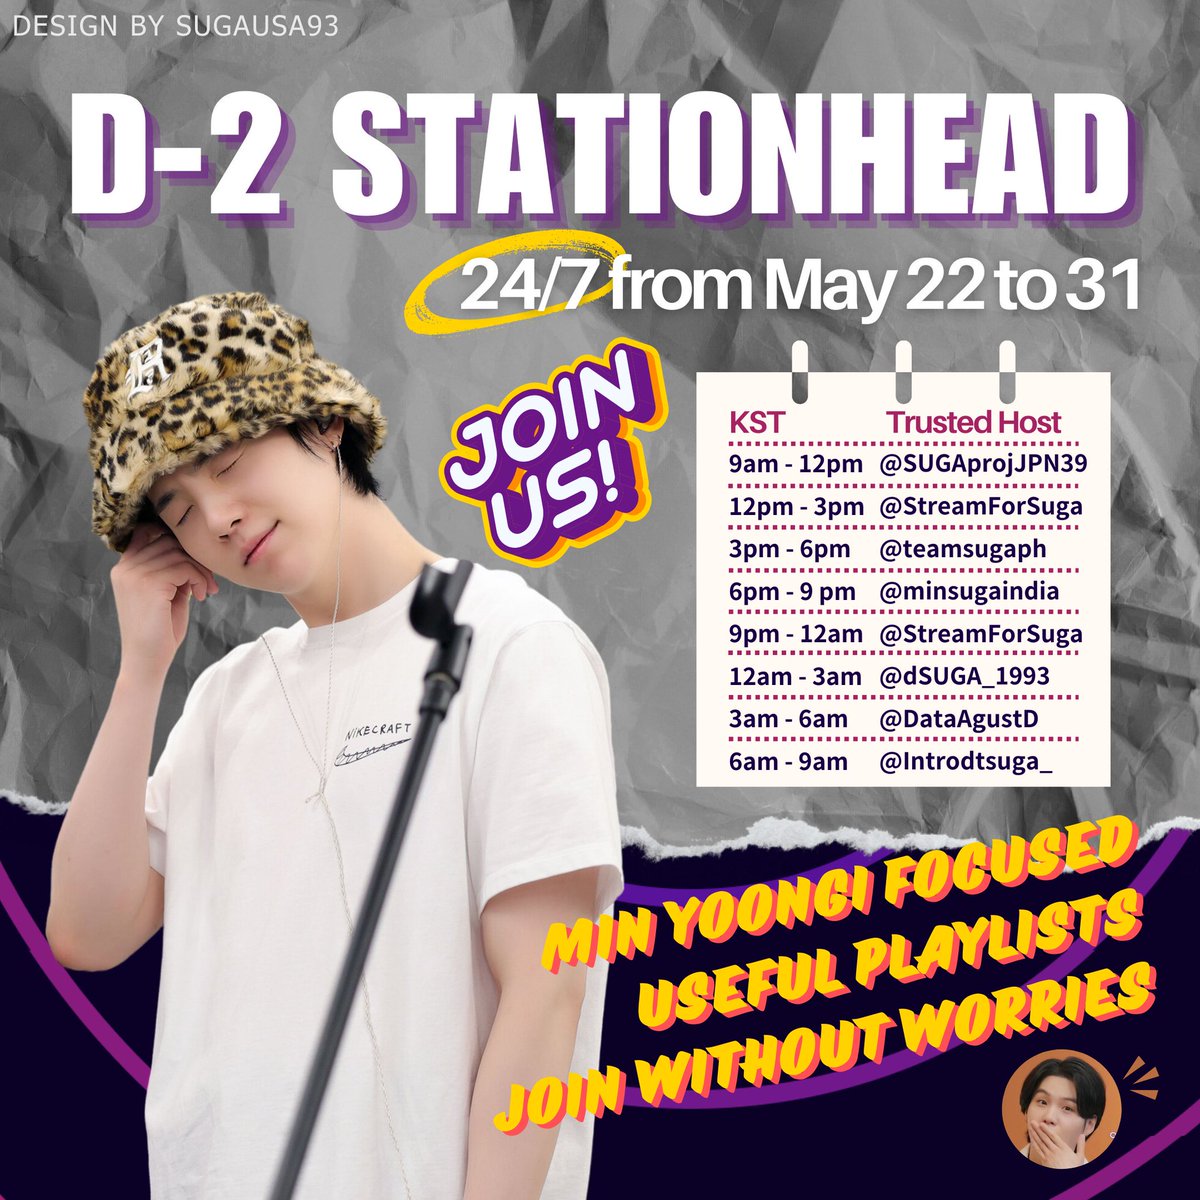 DAY 3 ⚔️ We're not done yet! Celebrate the 4th anniversary of Agust D's 'D-2' together with us and @StreamForSuga! 🎧: stationhead.com/streamforsuga HAPPY ANNIVERSARY D-2 #4YearsWithD2 AGUST D DYNASTY